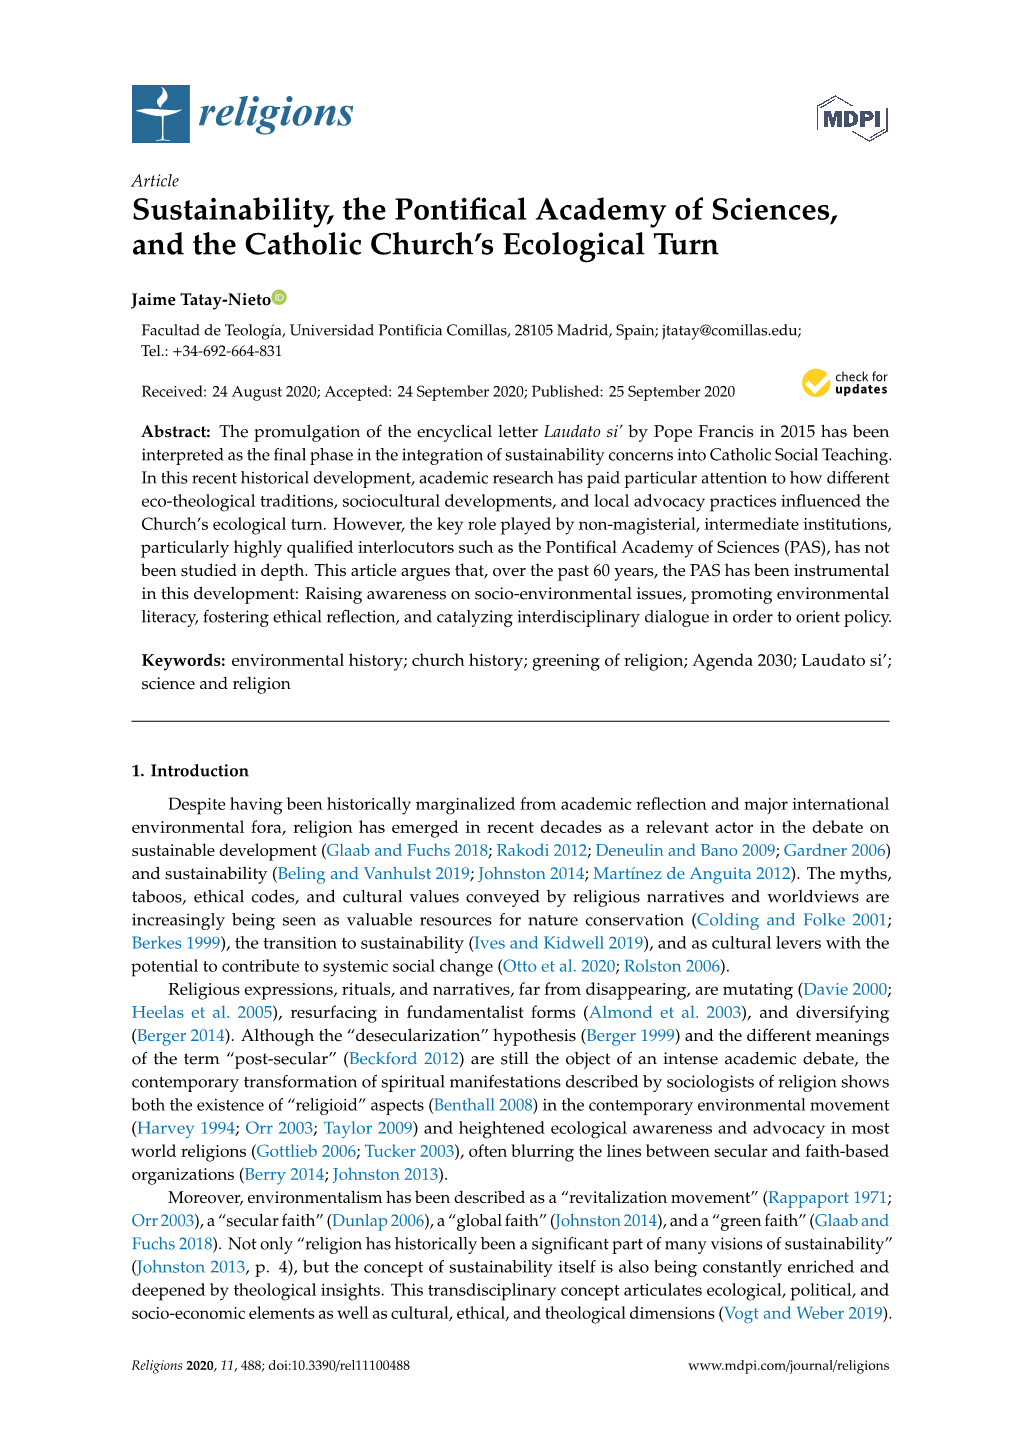 Sustainability, the Pontifical Academy of Sciences, and the Catholic